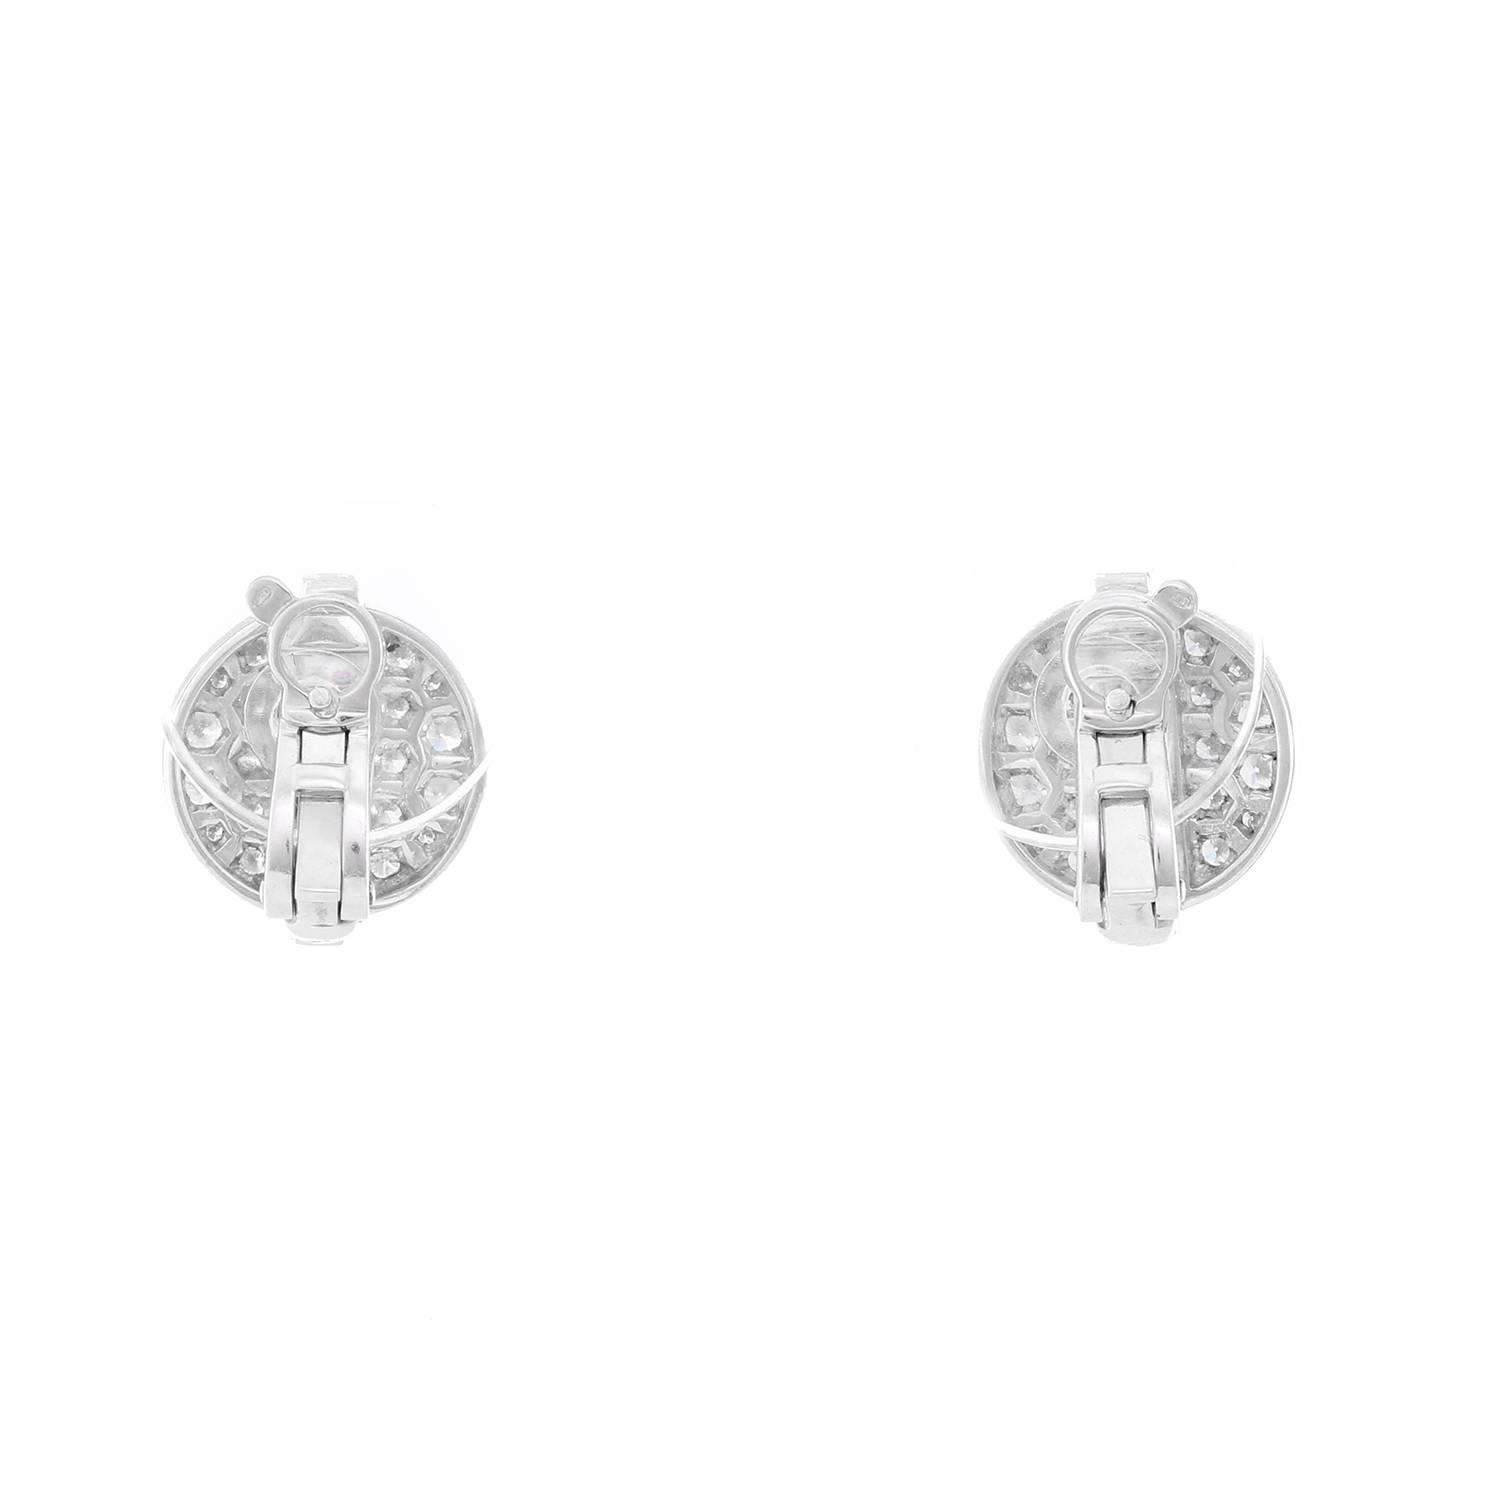 Cartier Large Himalia White Gold Earrings - . These Cartier earrings feature 18k White Gold Himalia earrings with 1.51 cts of round brilliant cut diamonds. Earrings are  stamped Cartier, 750, OH1694. Total weight is 11.6 grams. 14 mm in diameter.